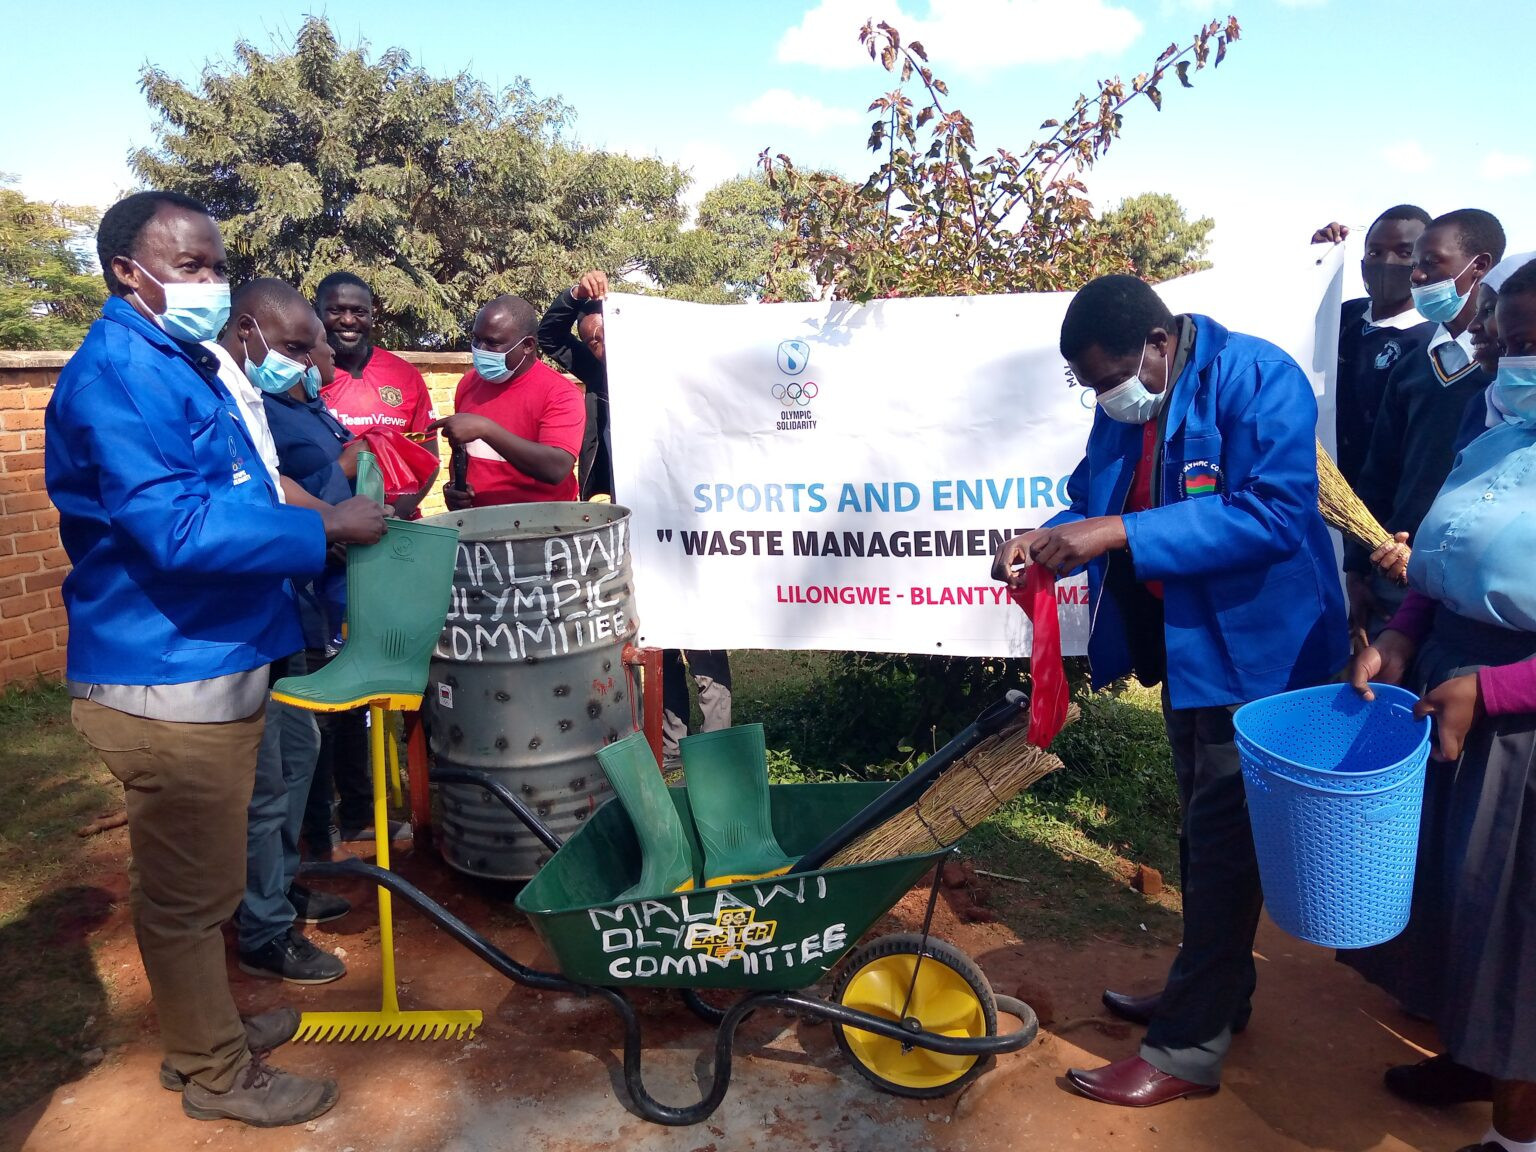 The MOC project aims to promote cleanliness and proper methods of waste disposal in Malawi ©MOC